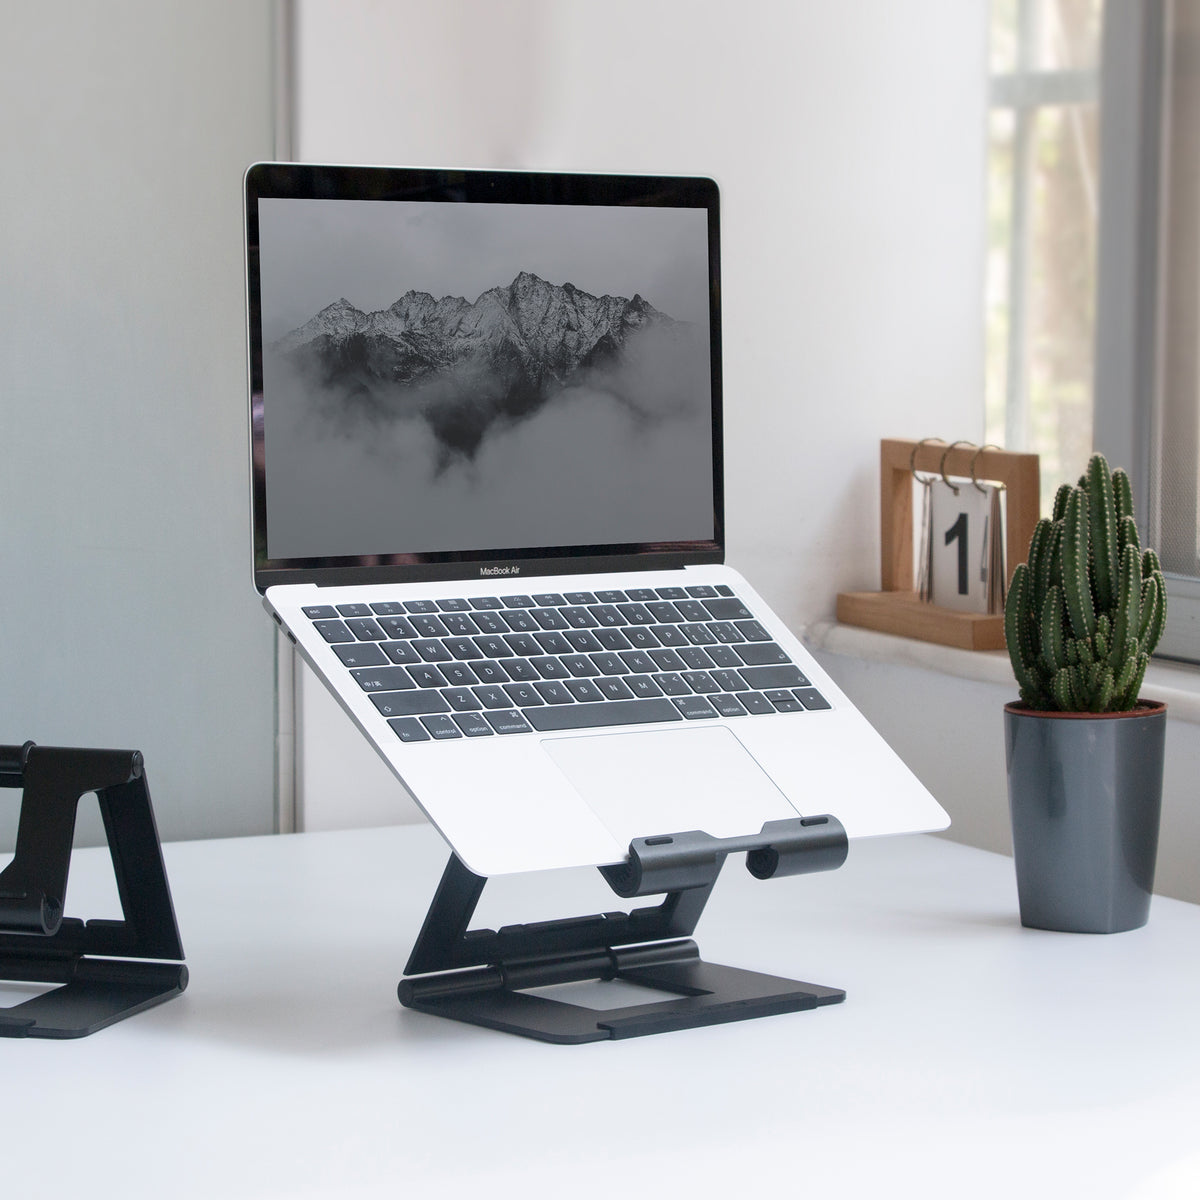 Black Macbook Air stand on desk, laptop riser for office, study